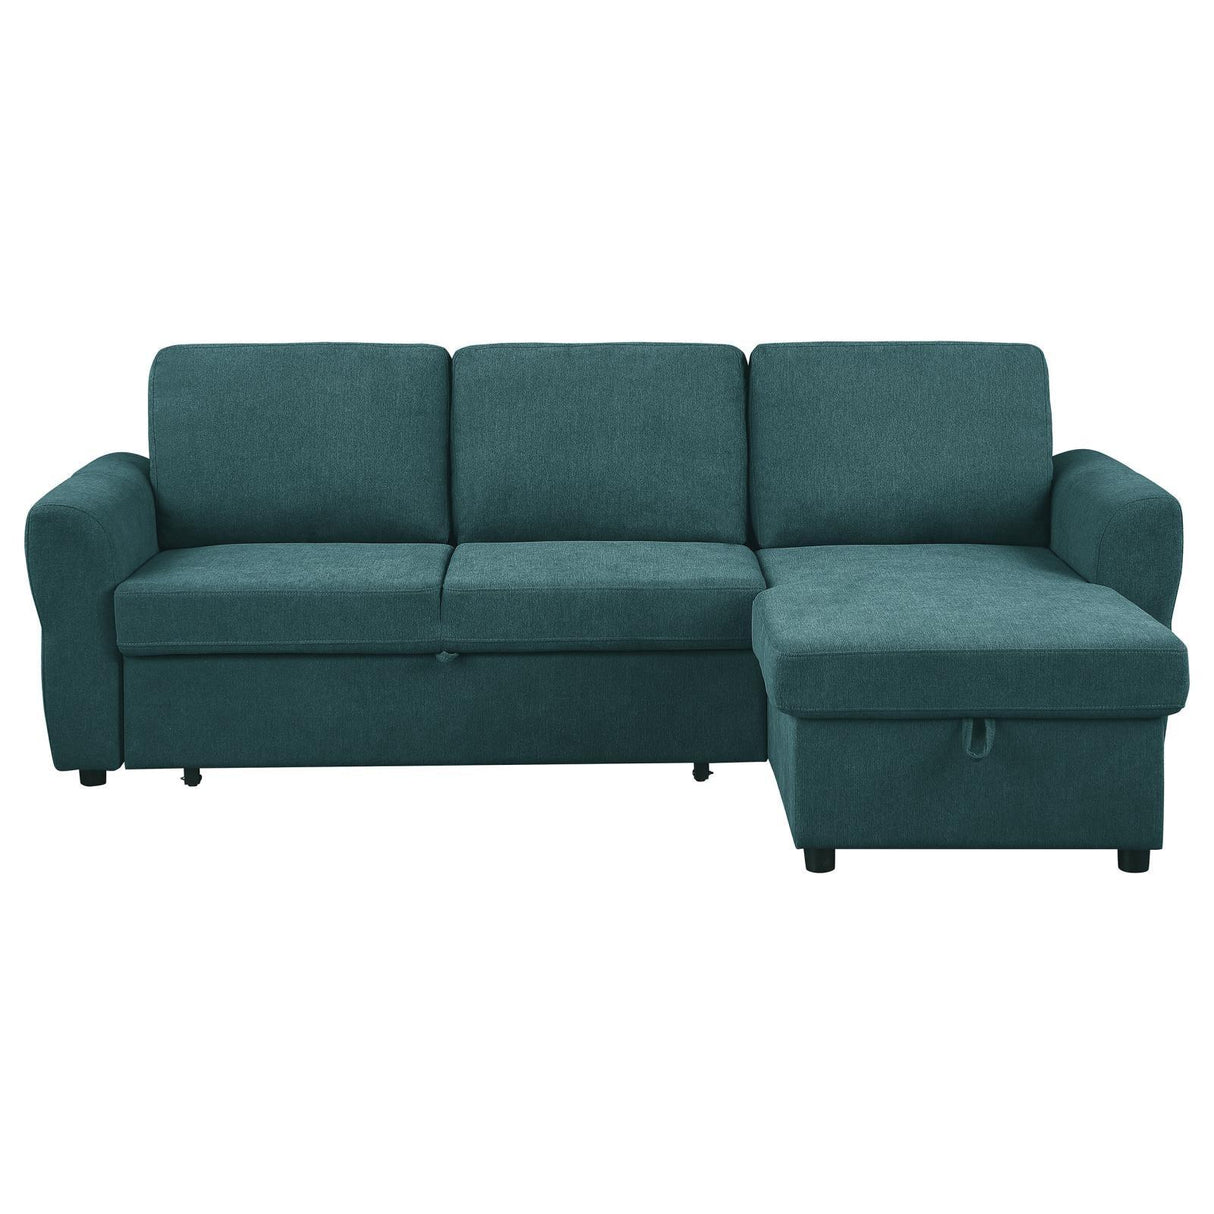 Samantha Upholstered Sleeper Sofa Sectional With Storage Chaise Teal Blue 511087 - Ella Furniture